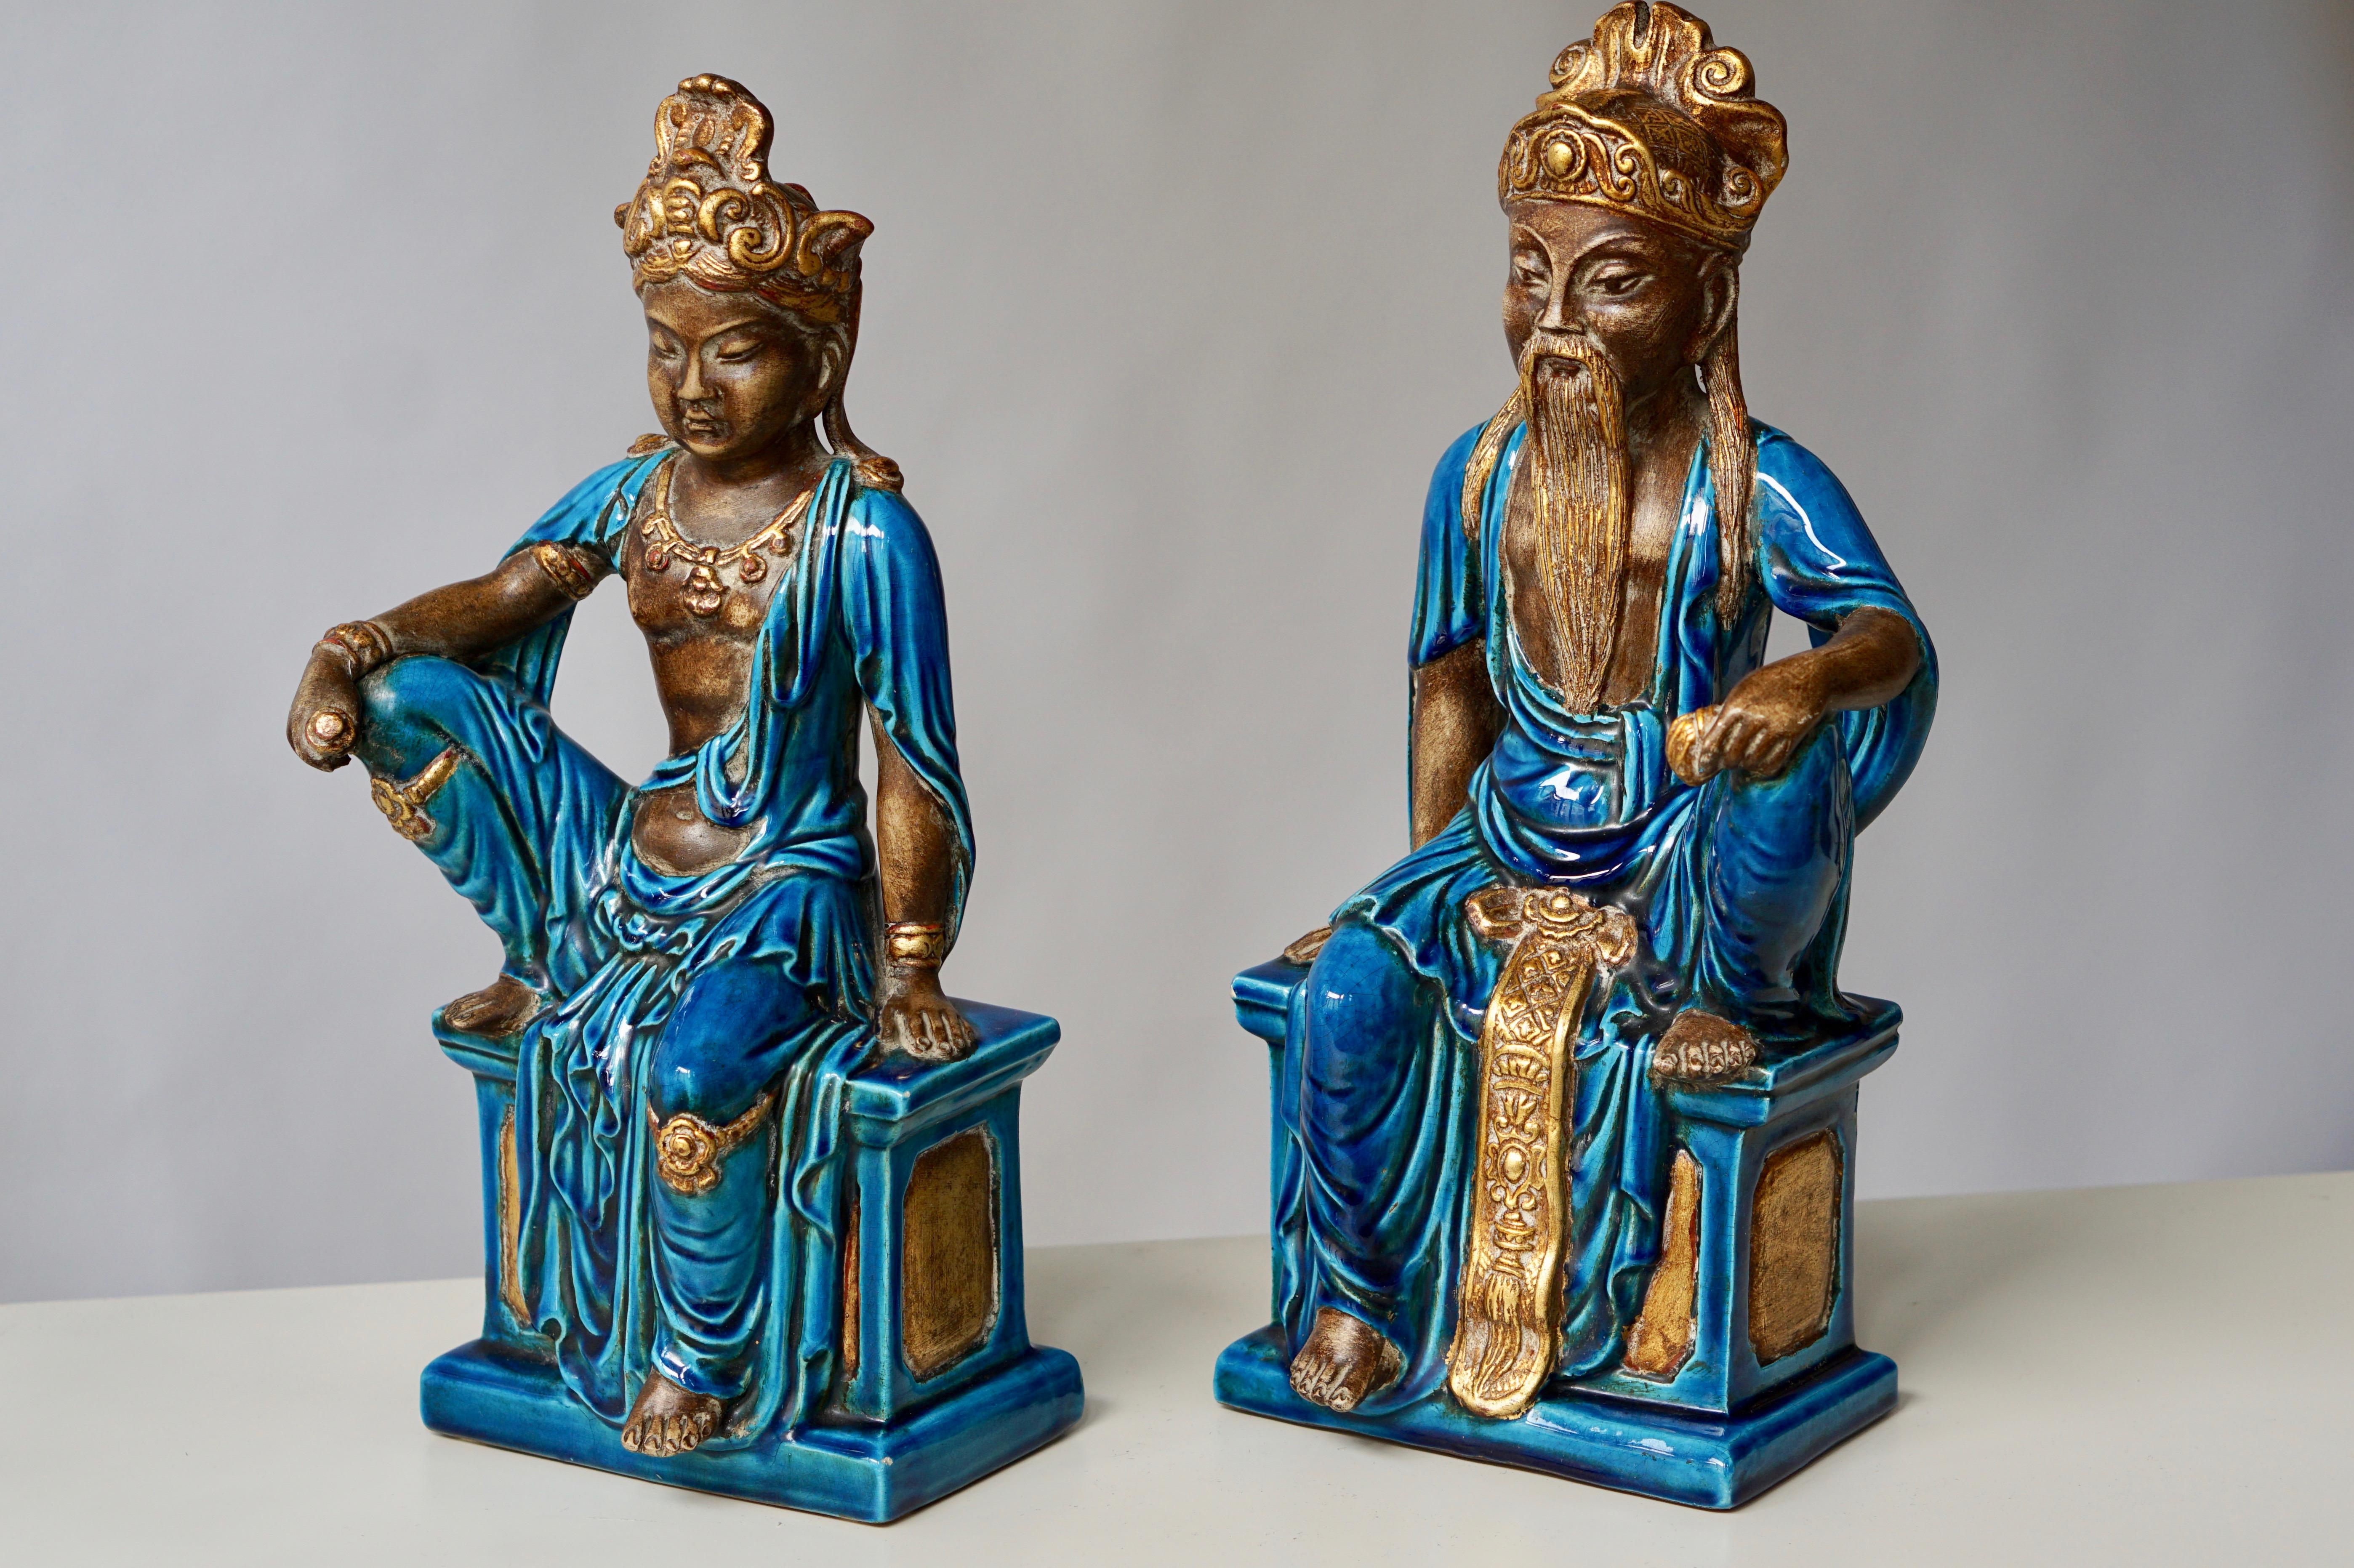 Pair of Ceramic Figurines Bu Ugo Zaccagnini In Good Condition For Sale In Antwerp, BE